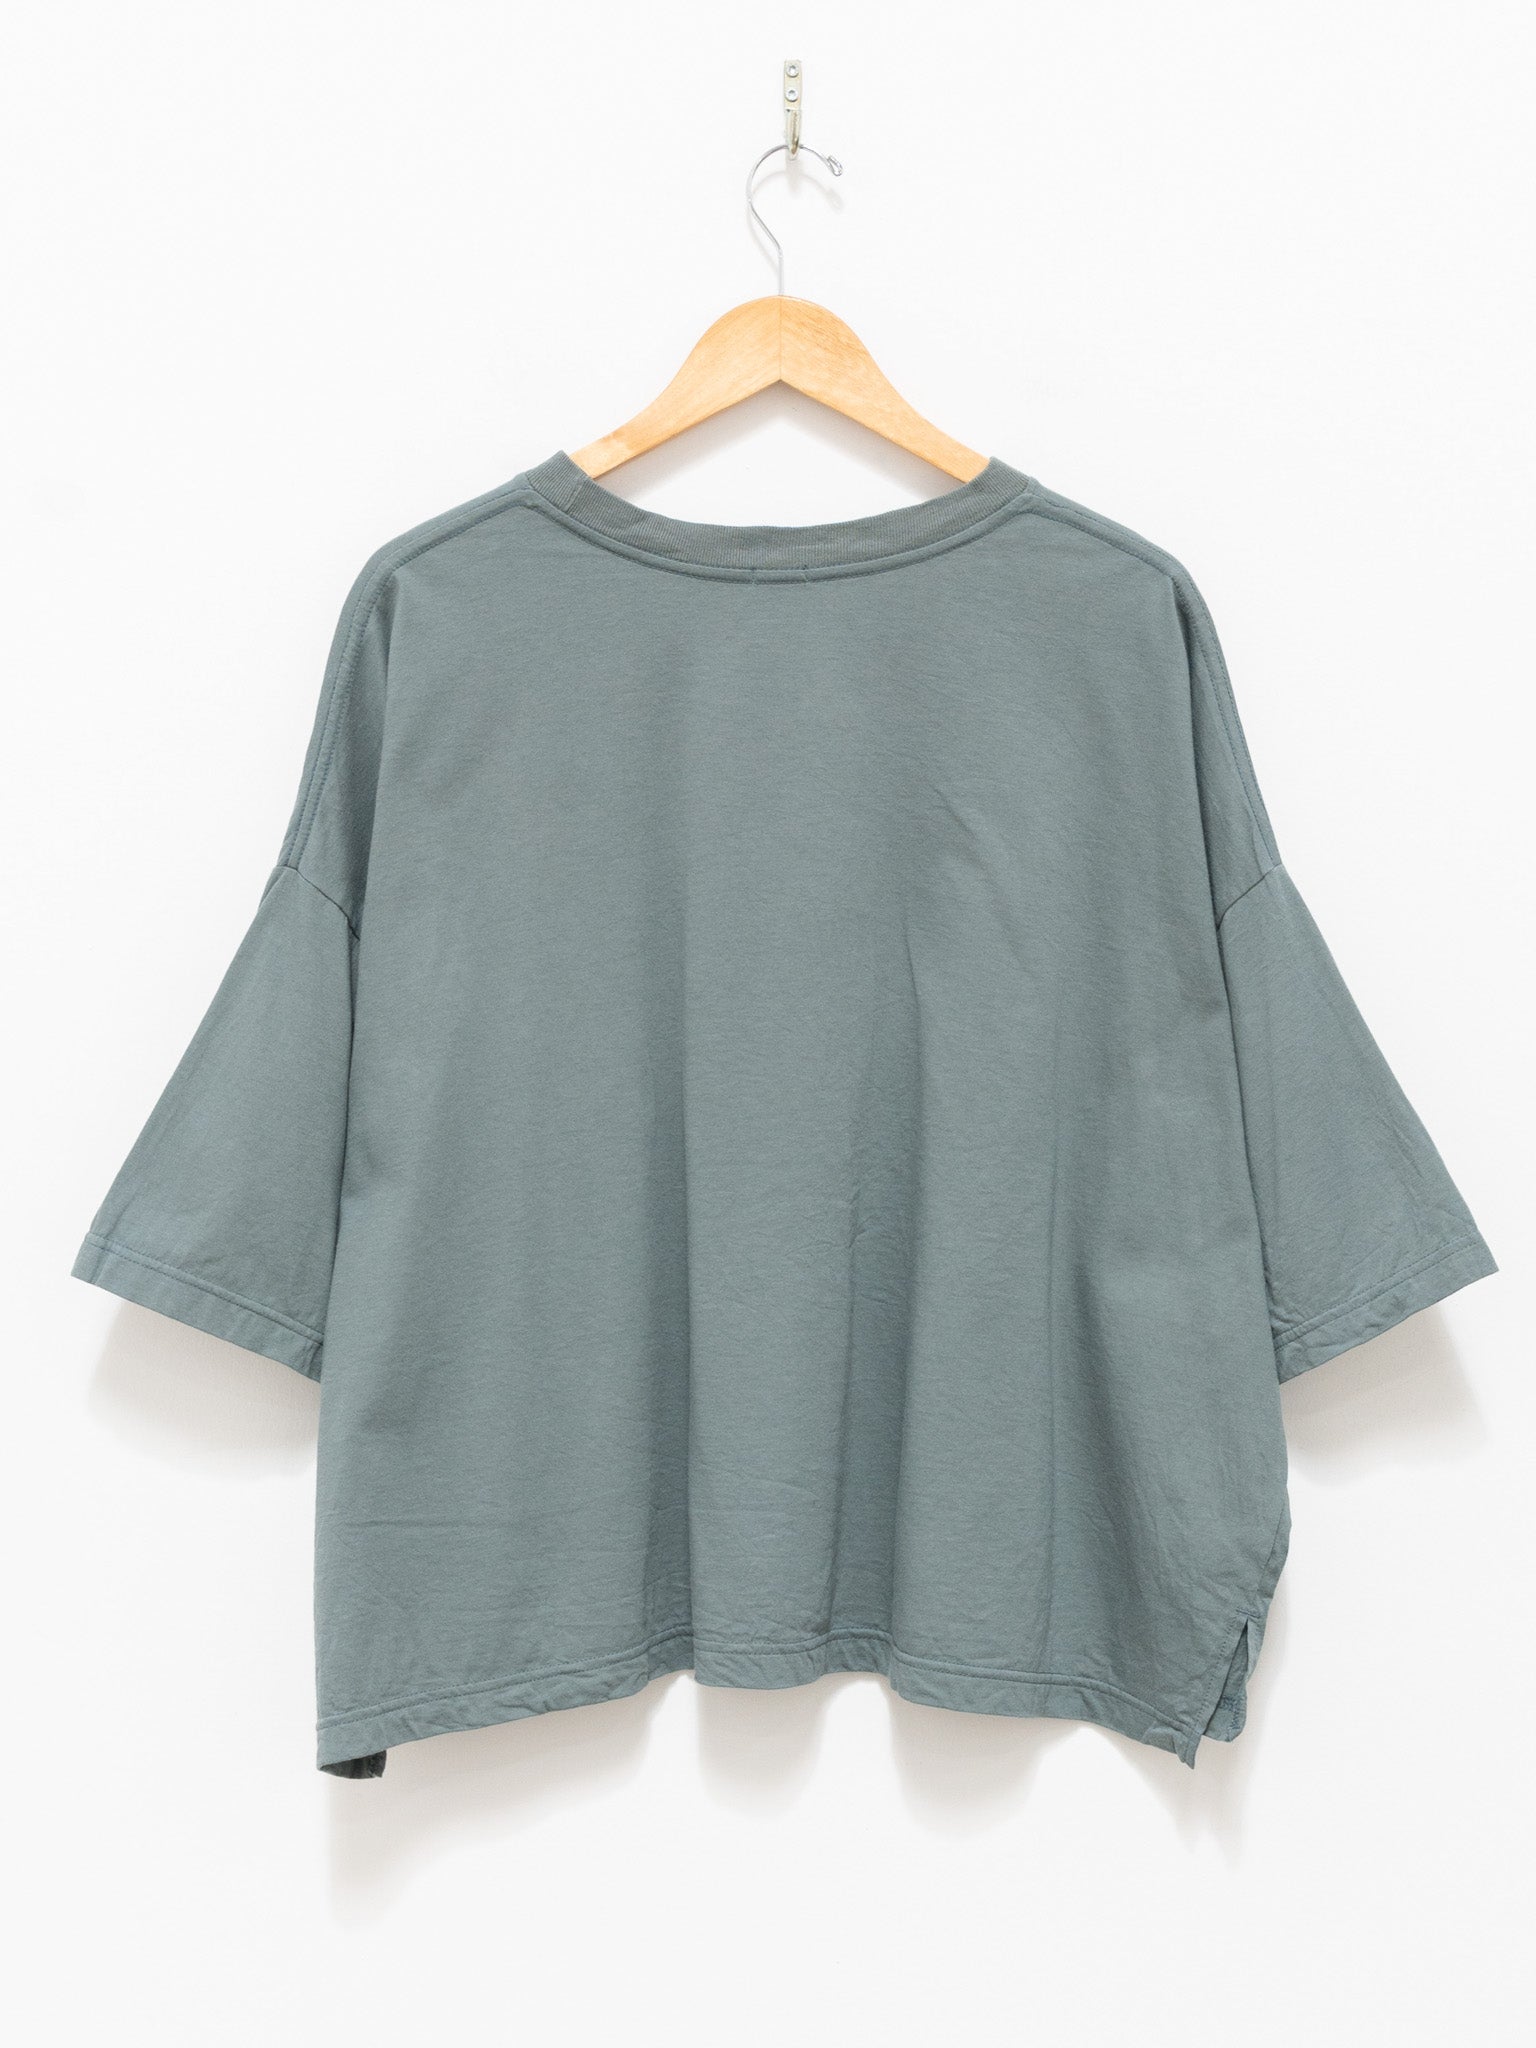 Namu Shop - ICHI Relaxed S/S Pullover - Green